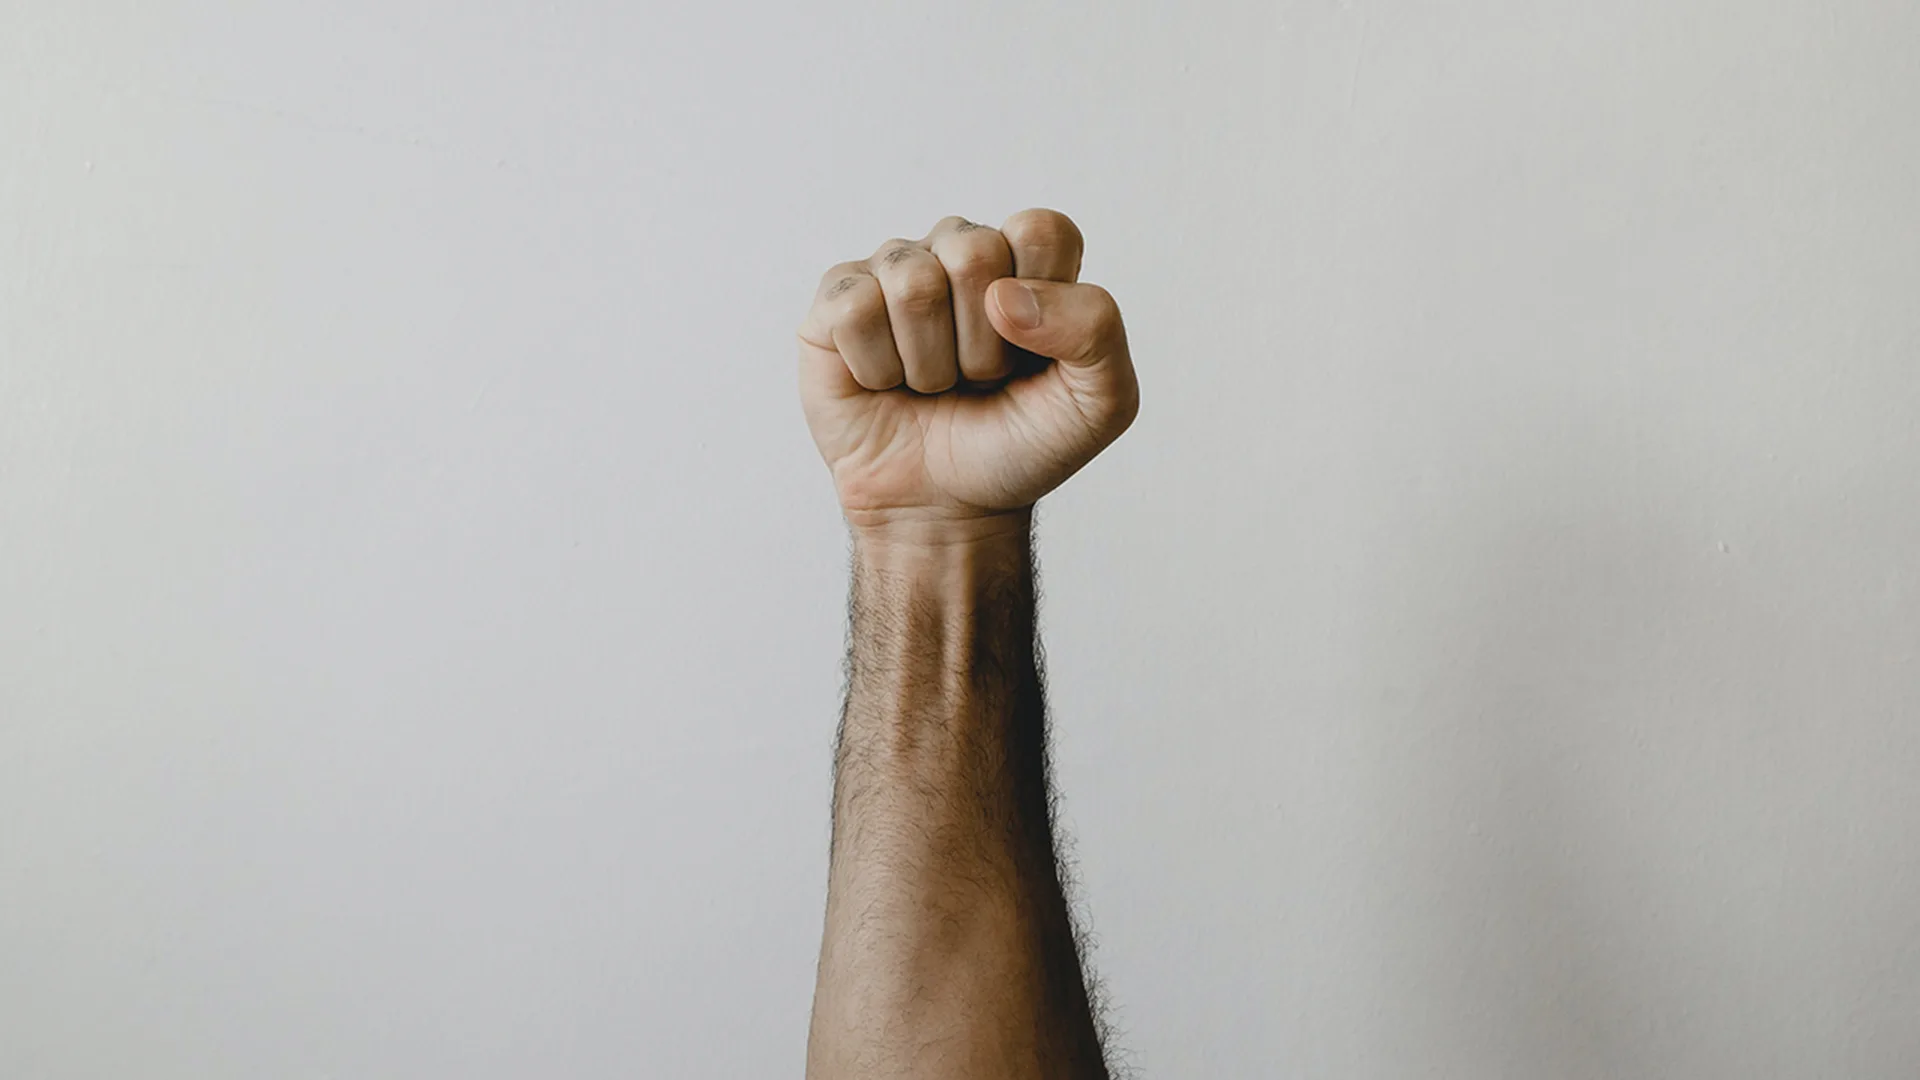 A fist in front of a white background